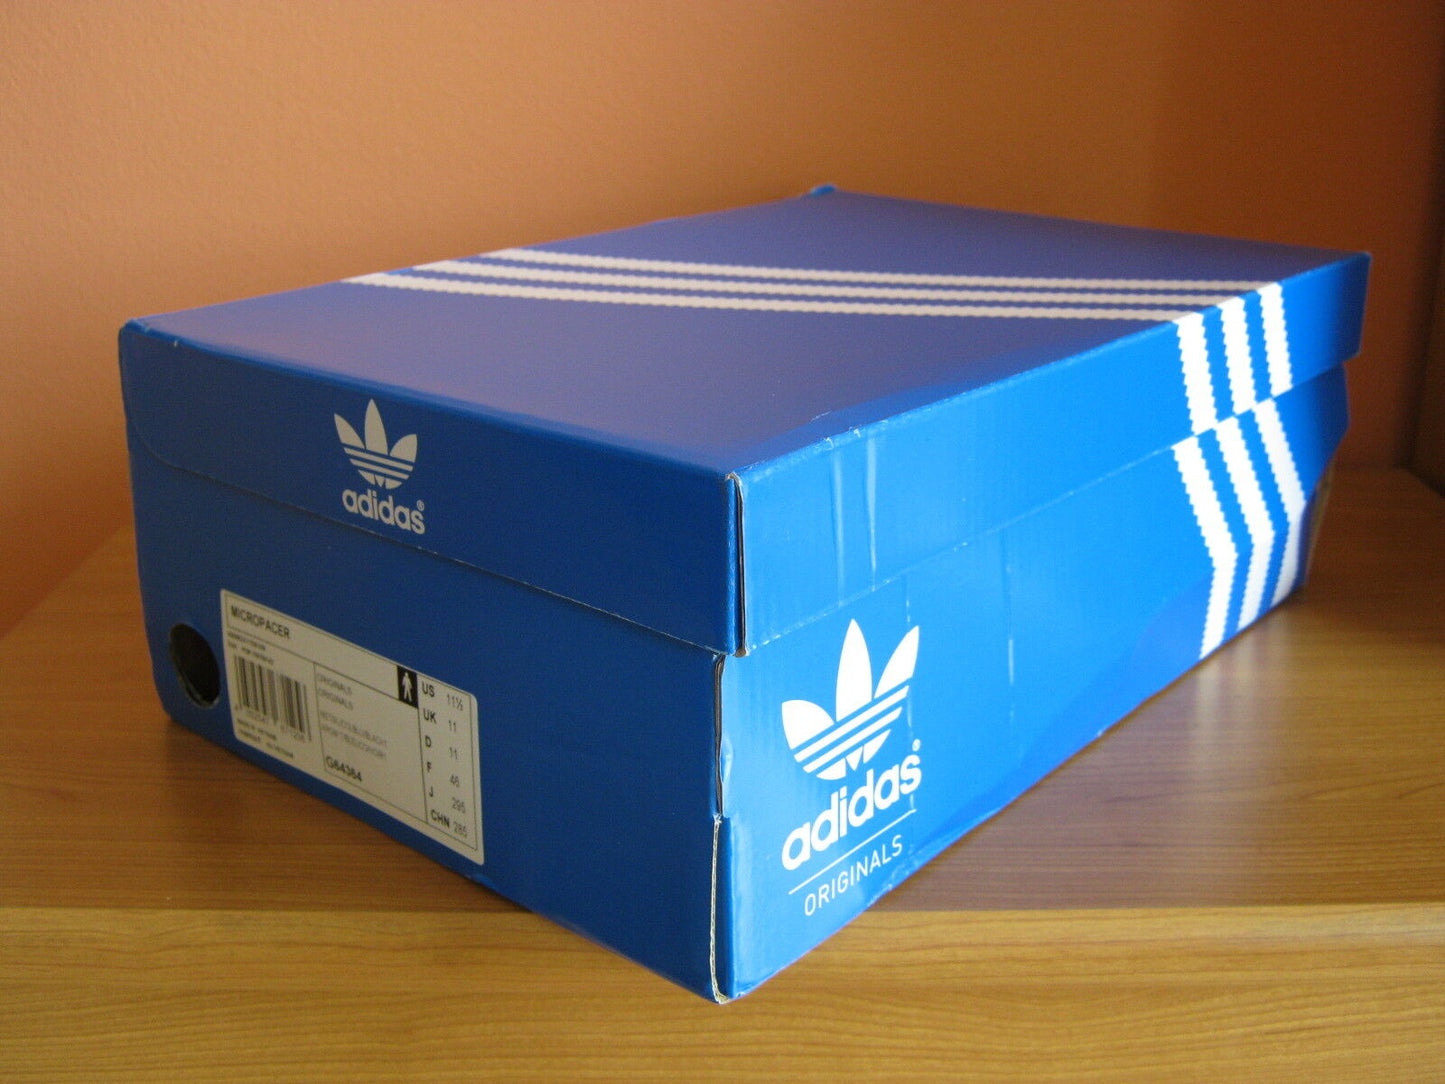 Adidas Micropacer 1984 Size? EXCLUSIVE 2012 vintage cw US 11,5 UK 11 FR 46